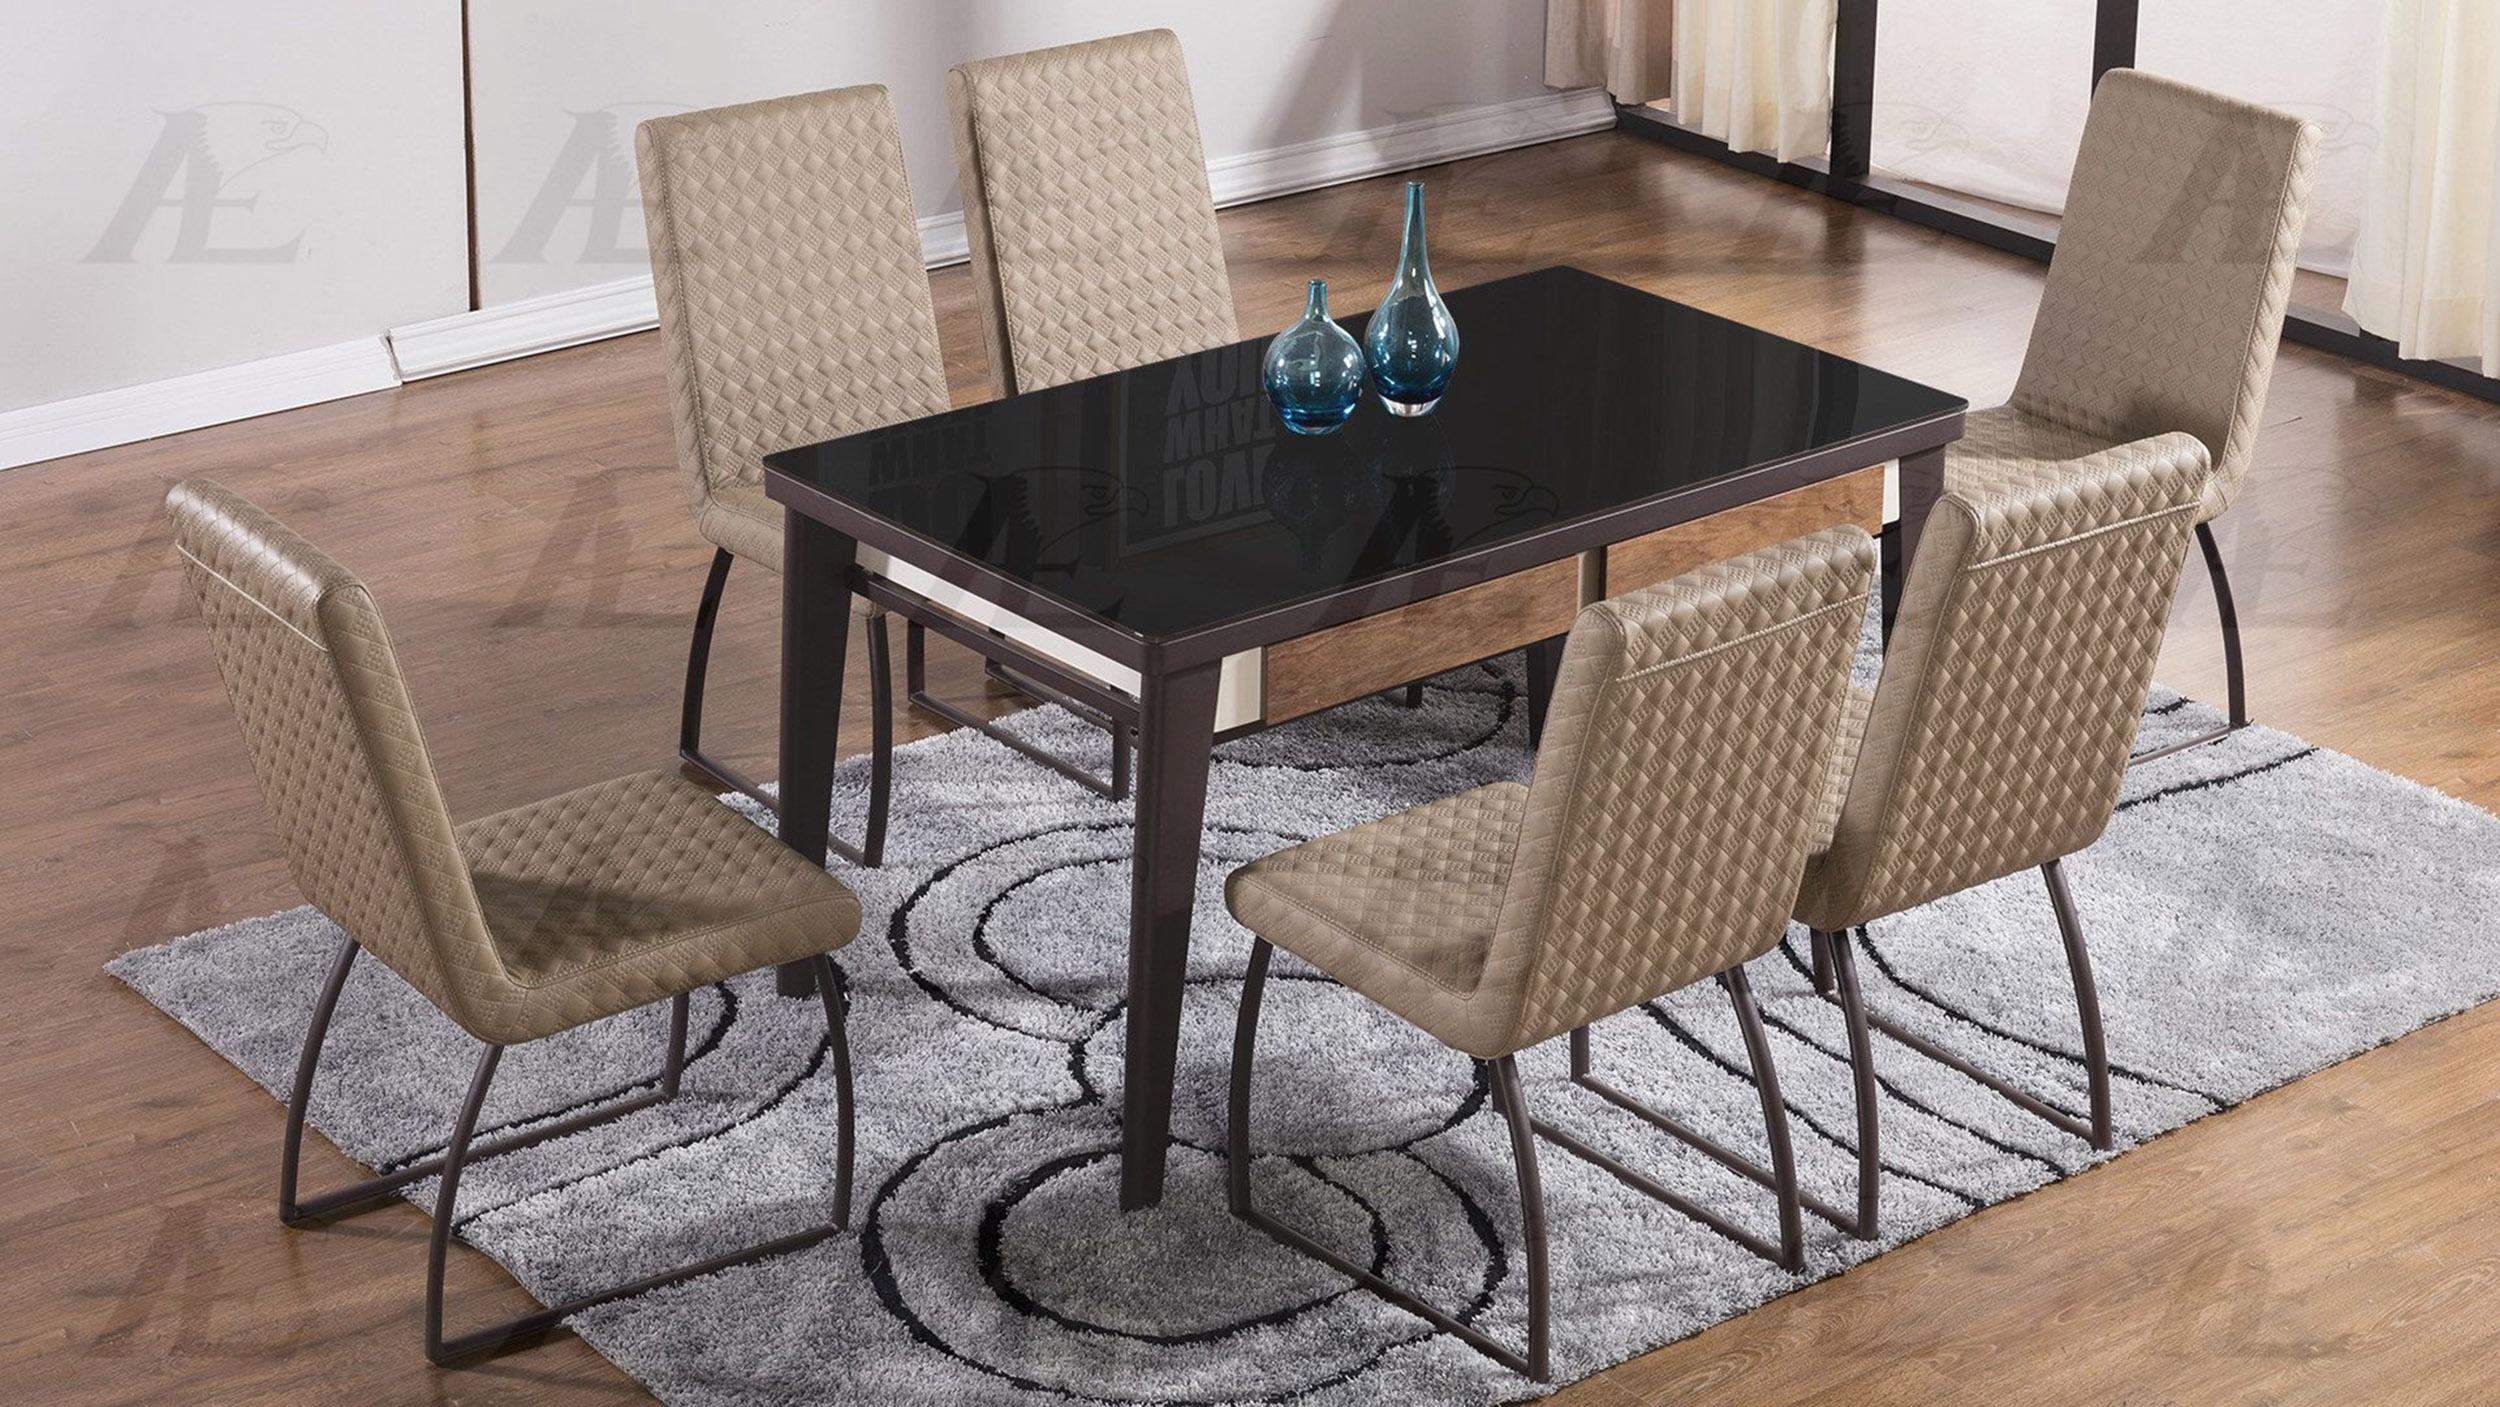 American Eagle Furniture DT-D326 Dining Table